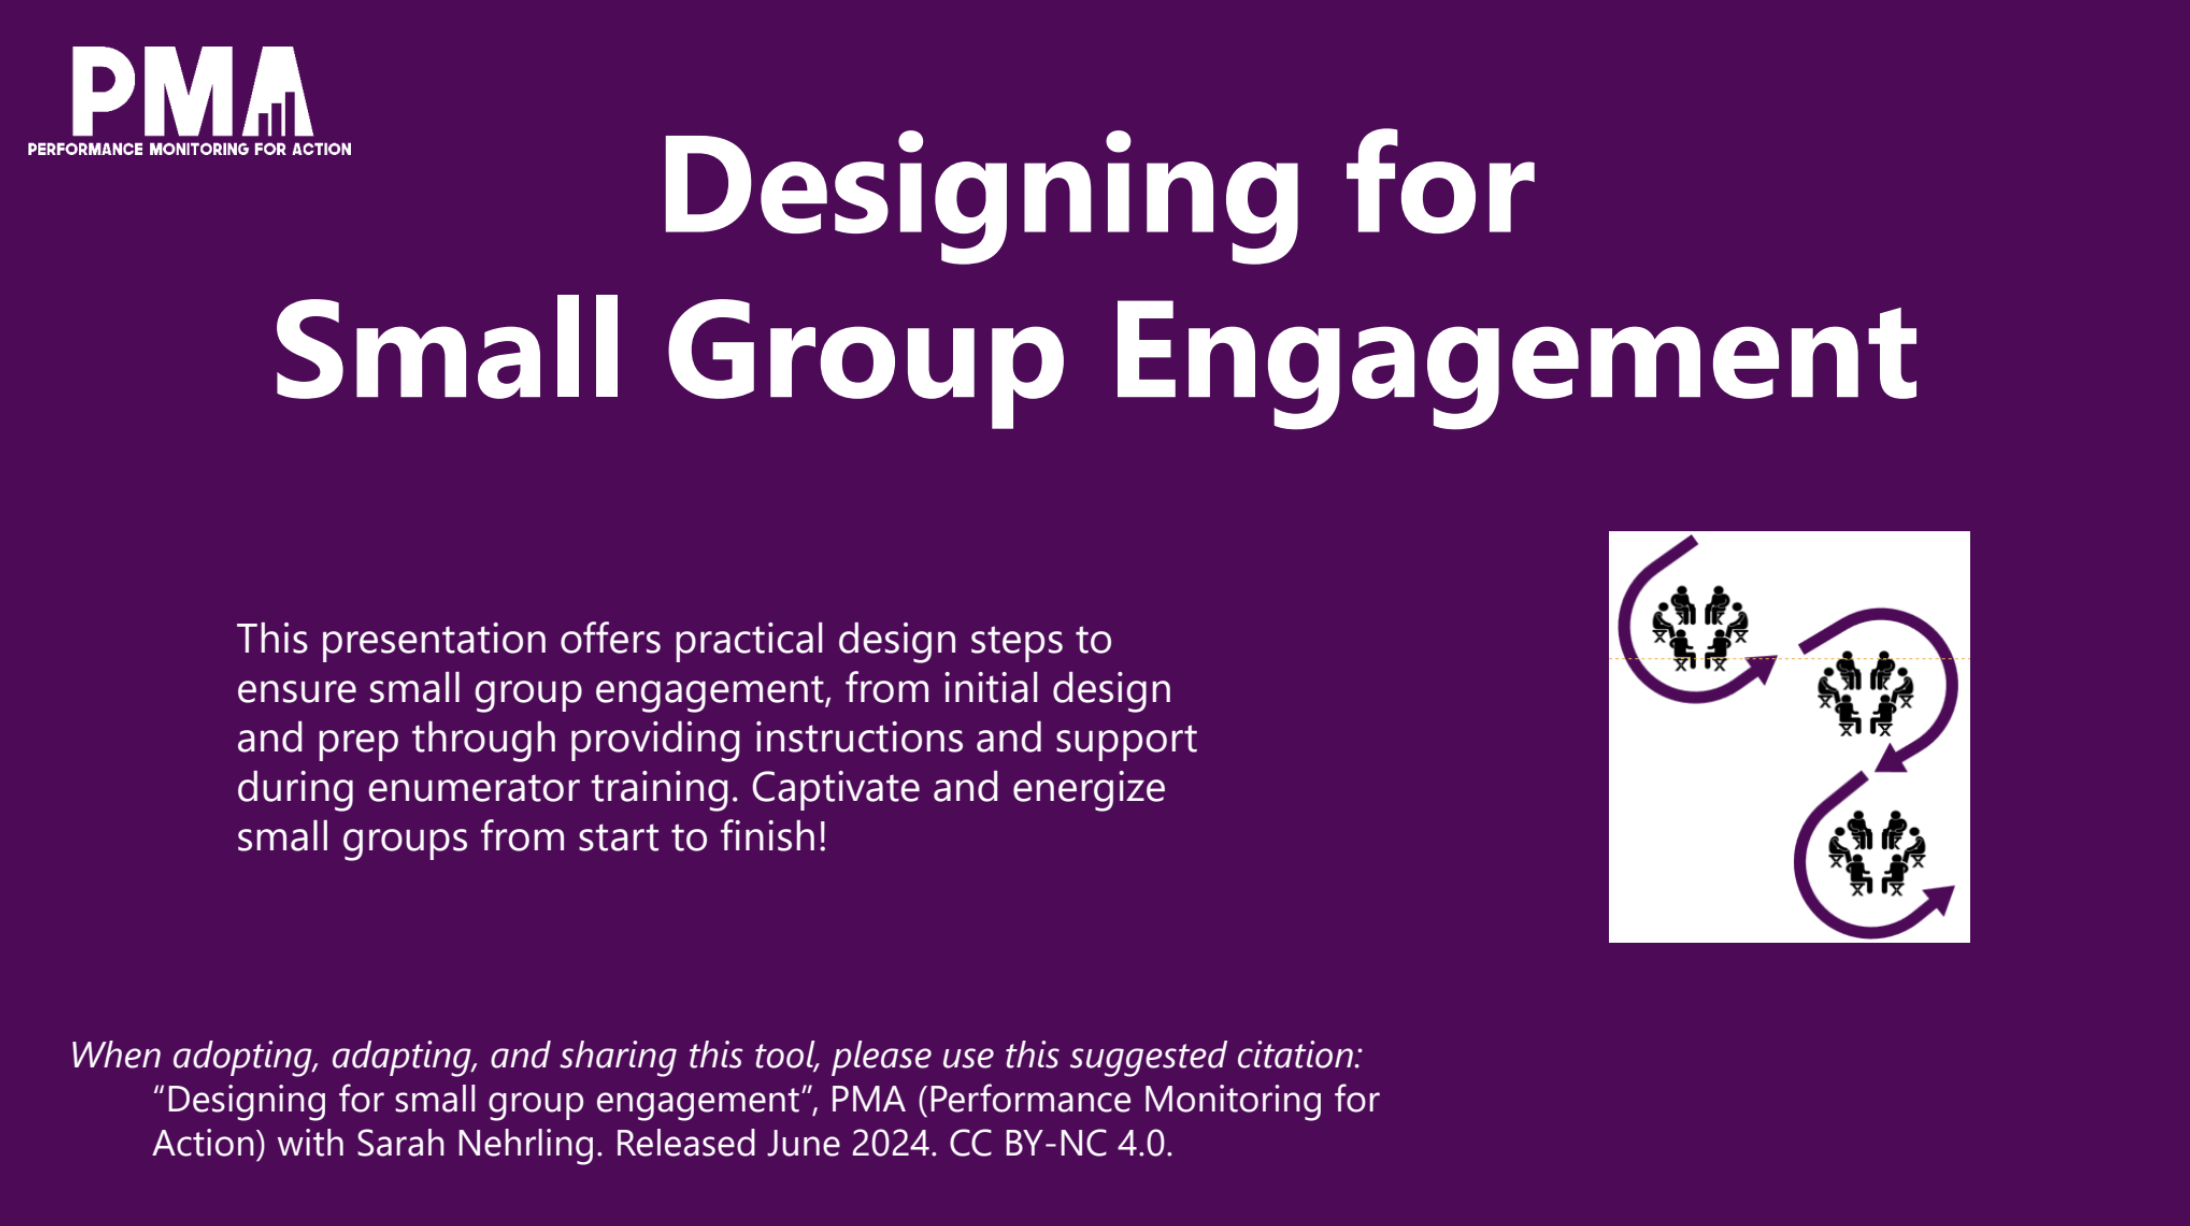 Designing for Small Group Engagement